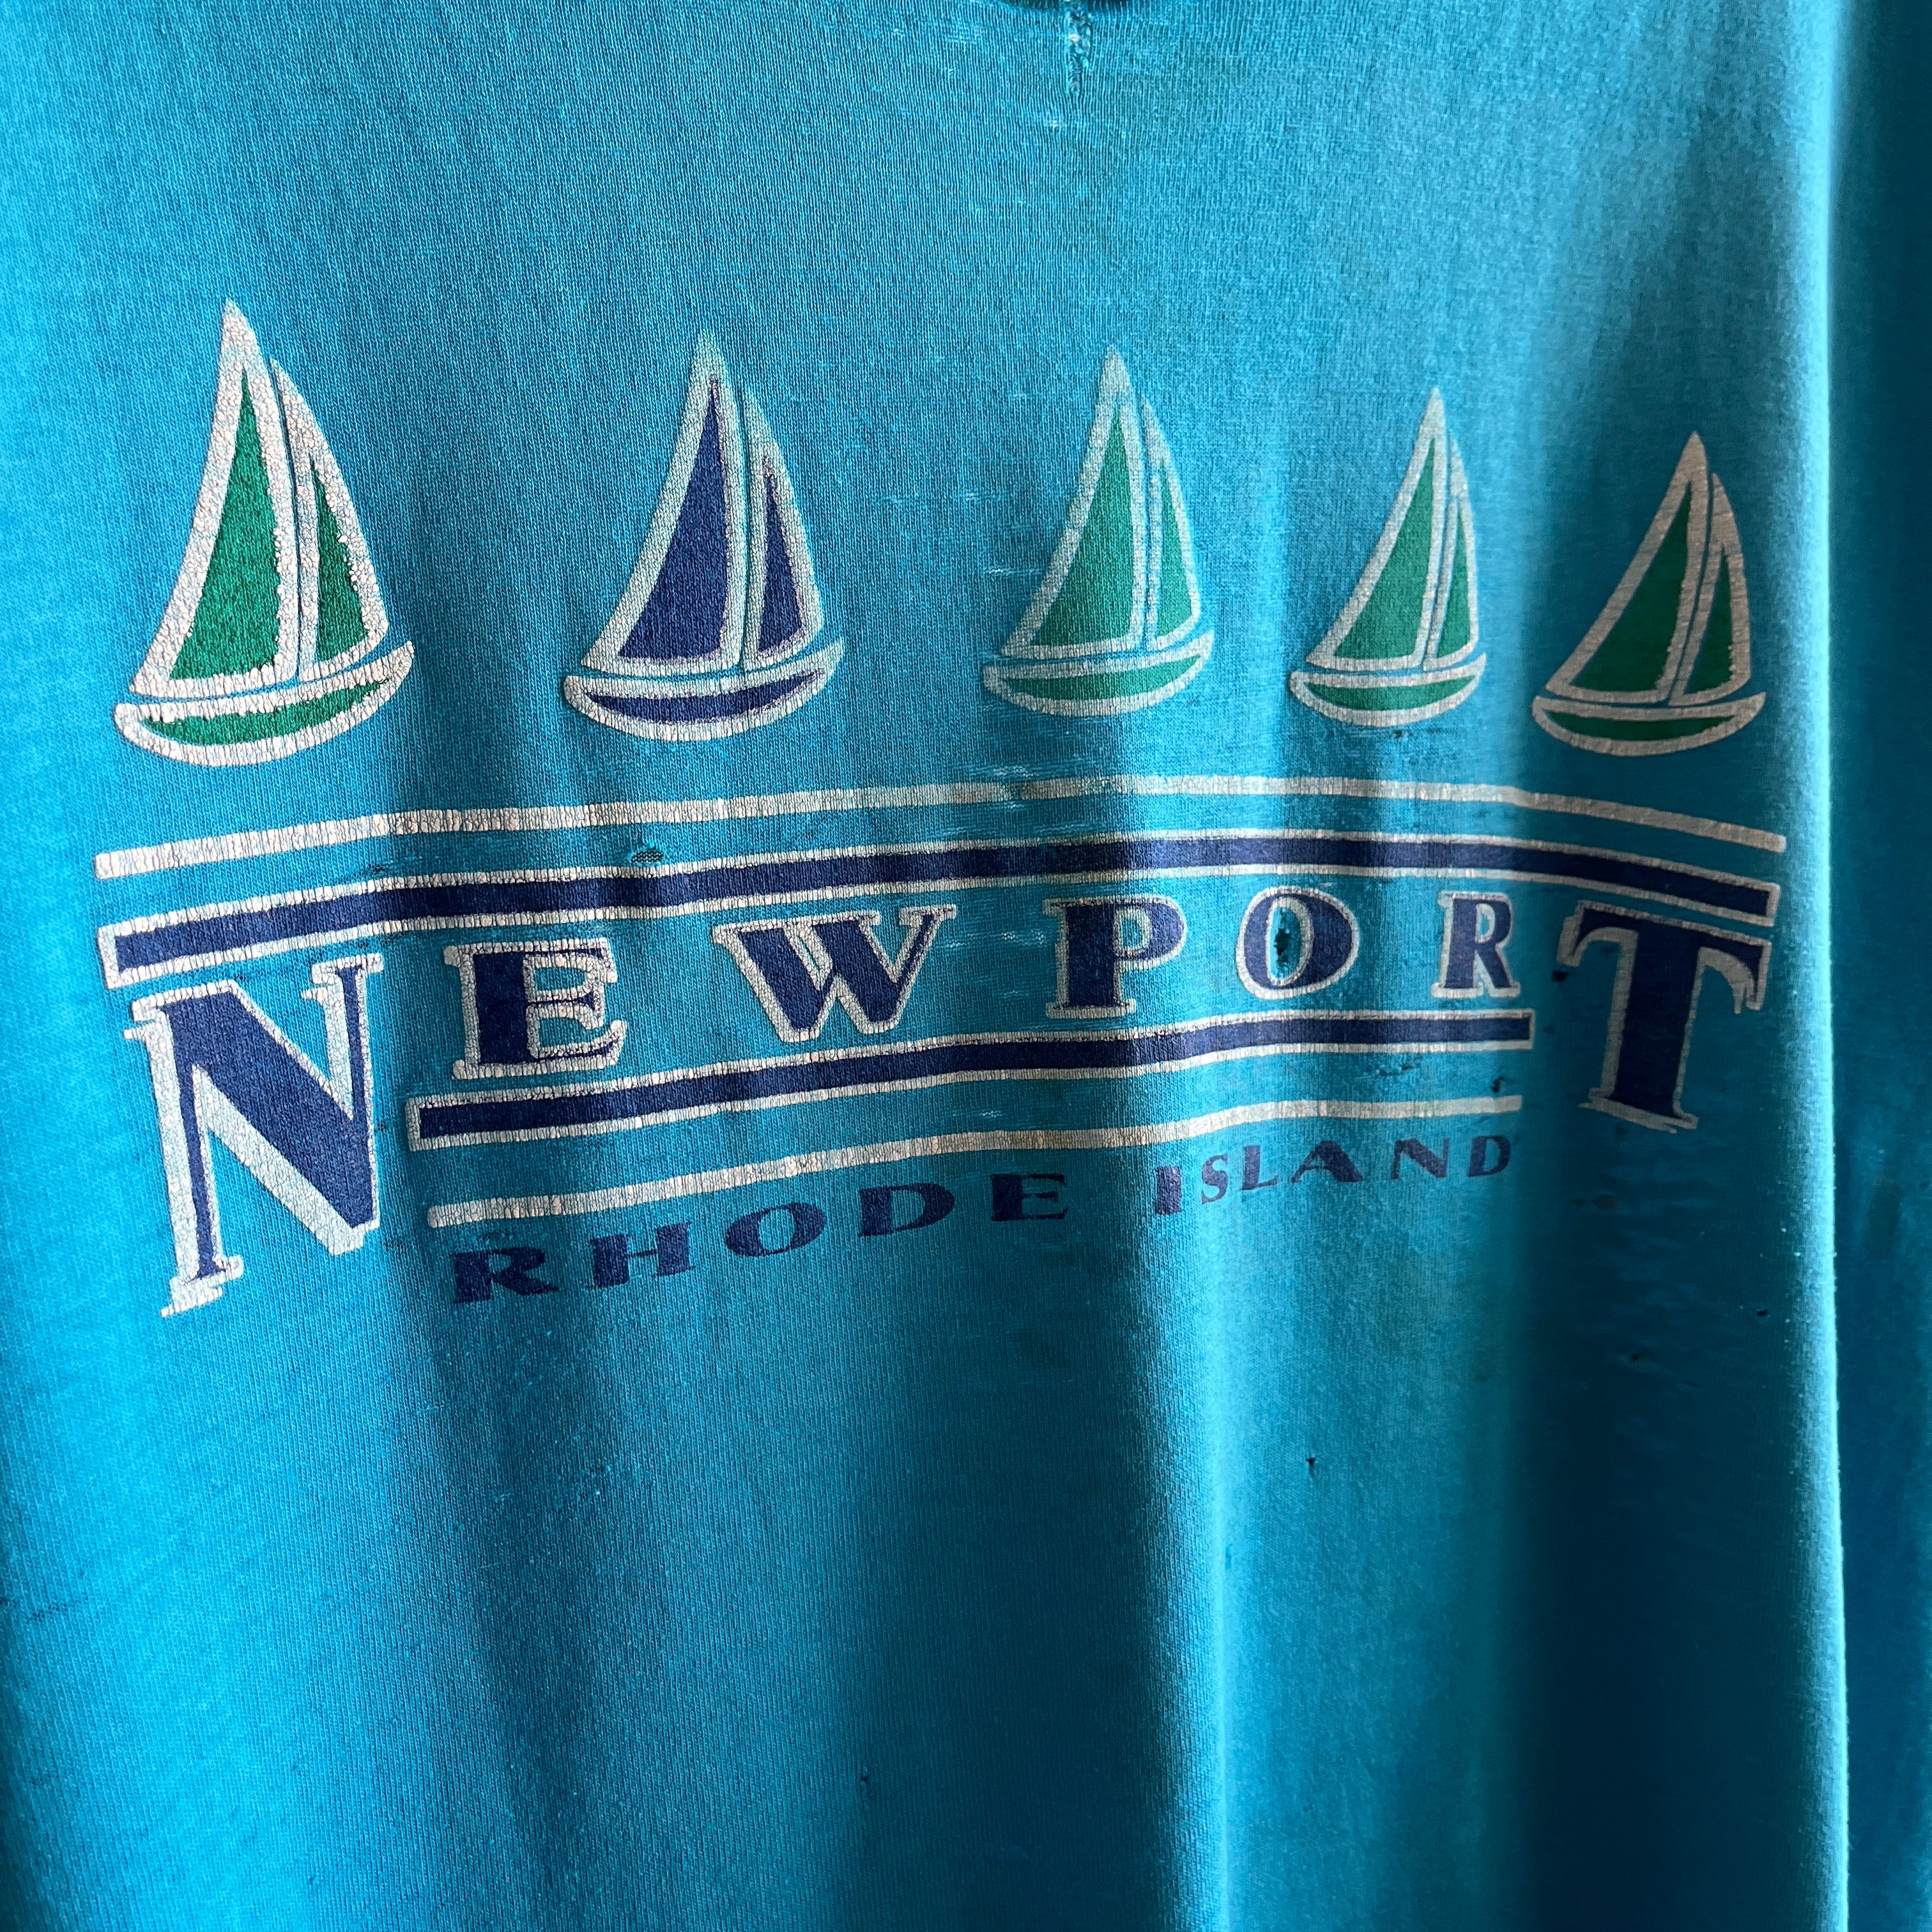 1990s New Port Rhode Island Completely Thrashed Oversized T-Shirt